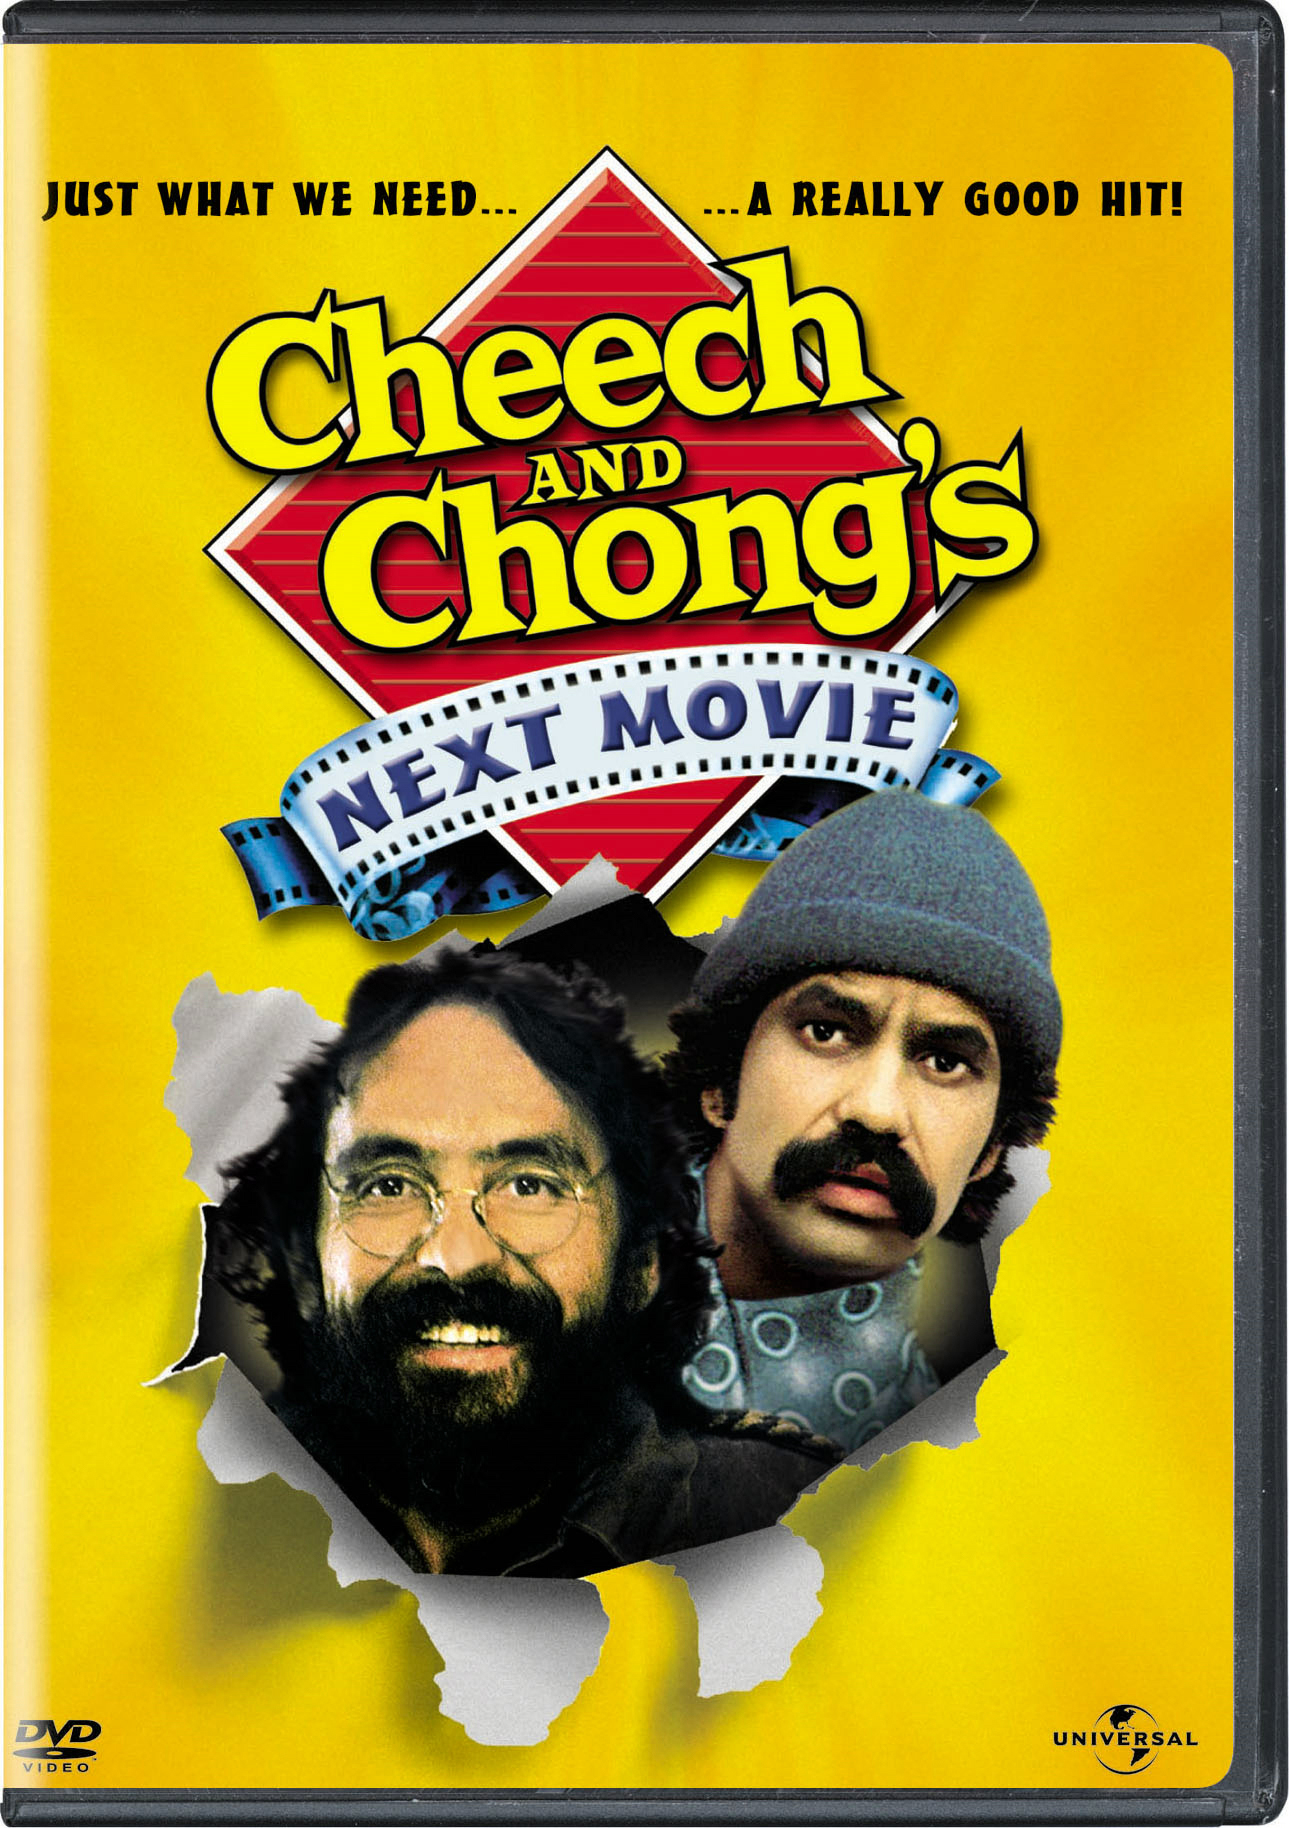 Cheech And Chong's Next Movie - DVD [ 1980 ]  - Cult Movies On DVD - Movies On GRUV